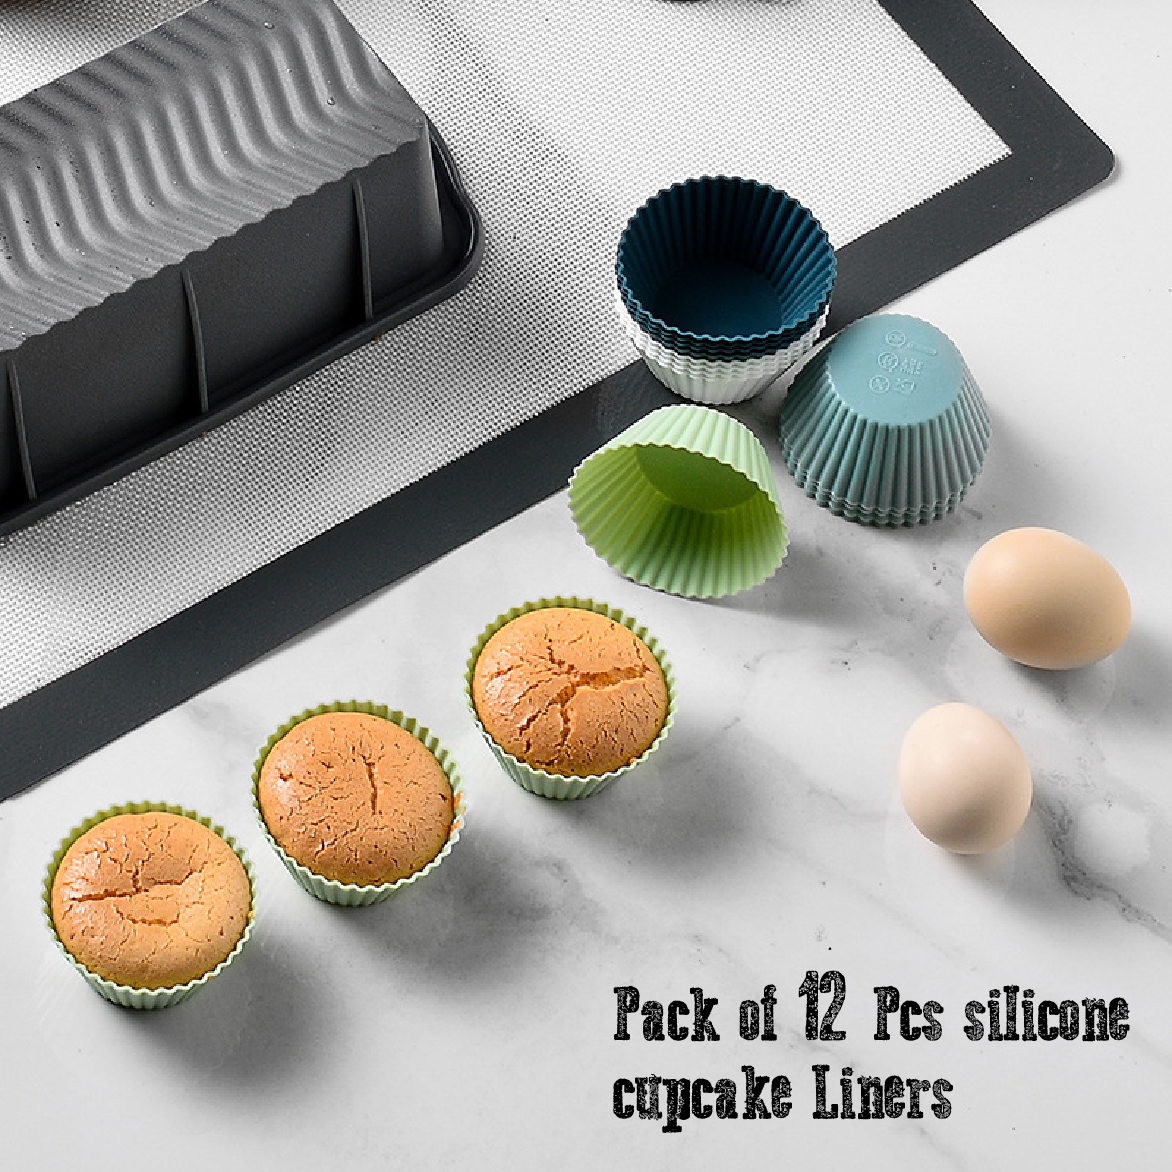 Silicone Baking Cup Liners - Individual Cupcake/ Muffin Molds - Set of 12pcs